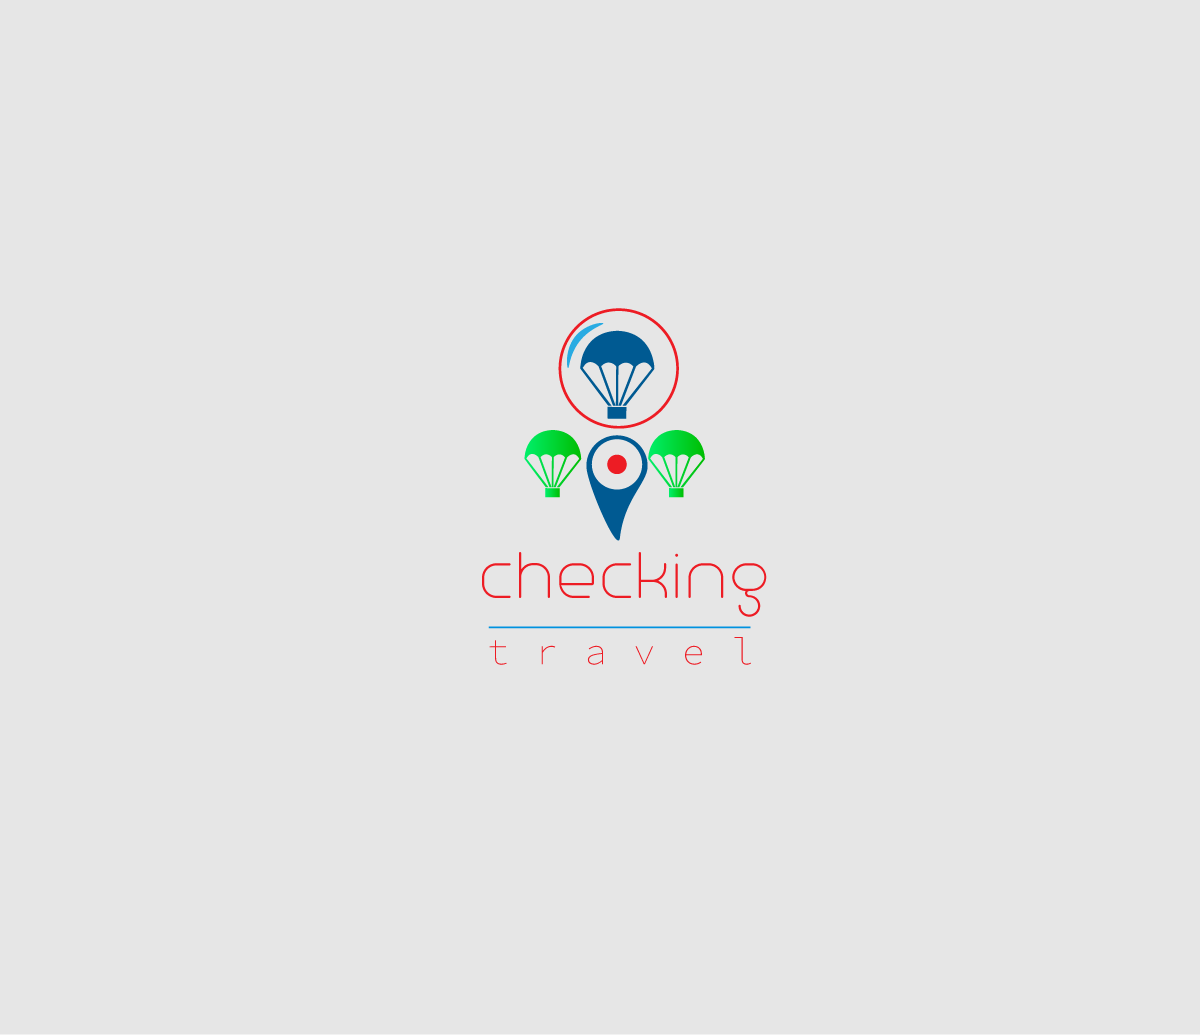 fitness lawyer Travelling Logo logo ideas branding  Company Work graphic PS ai